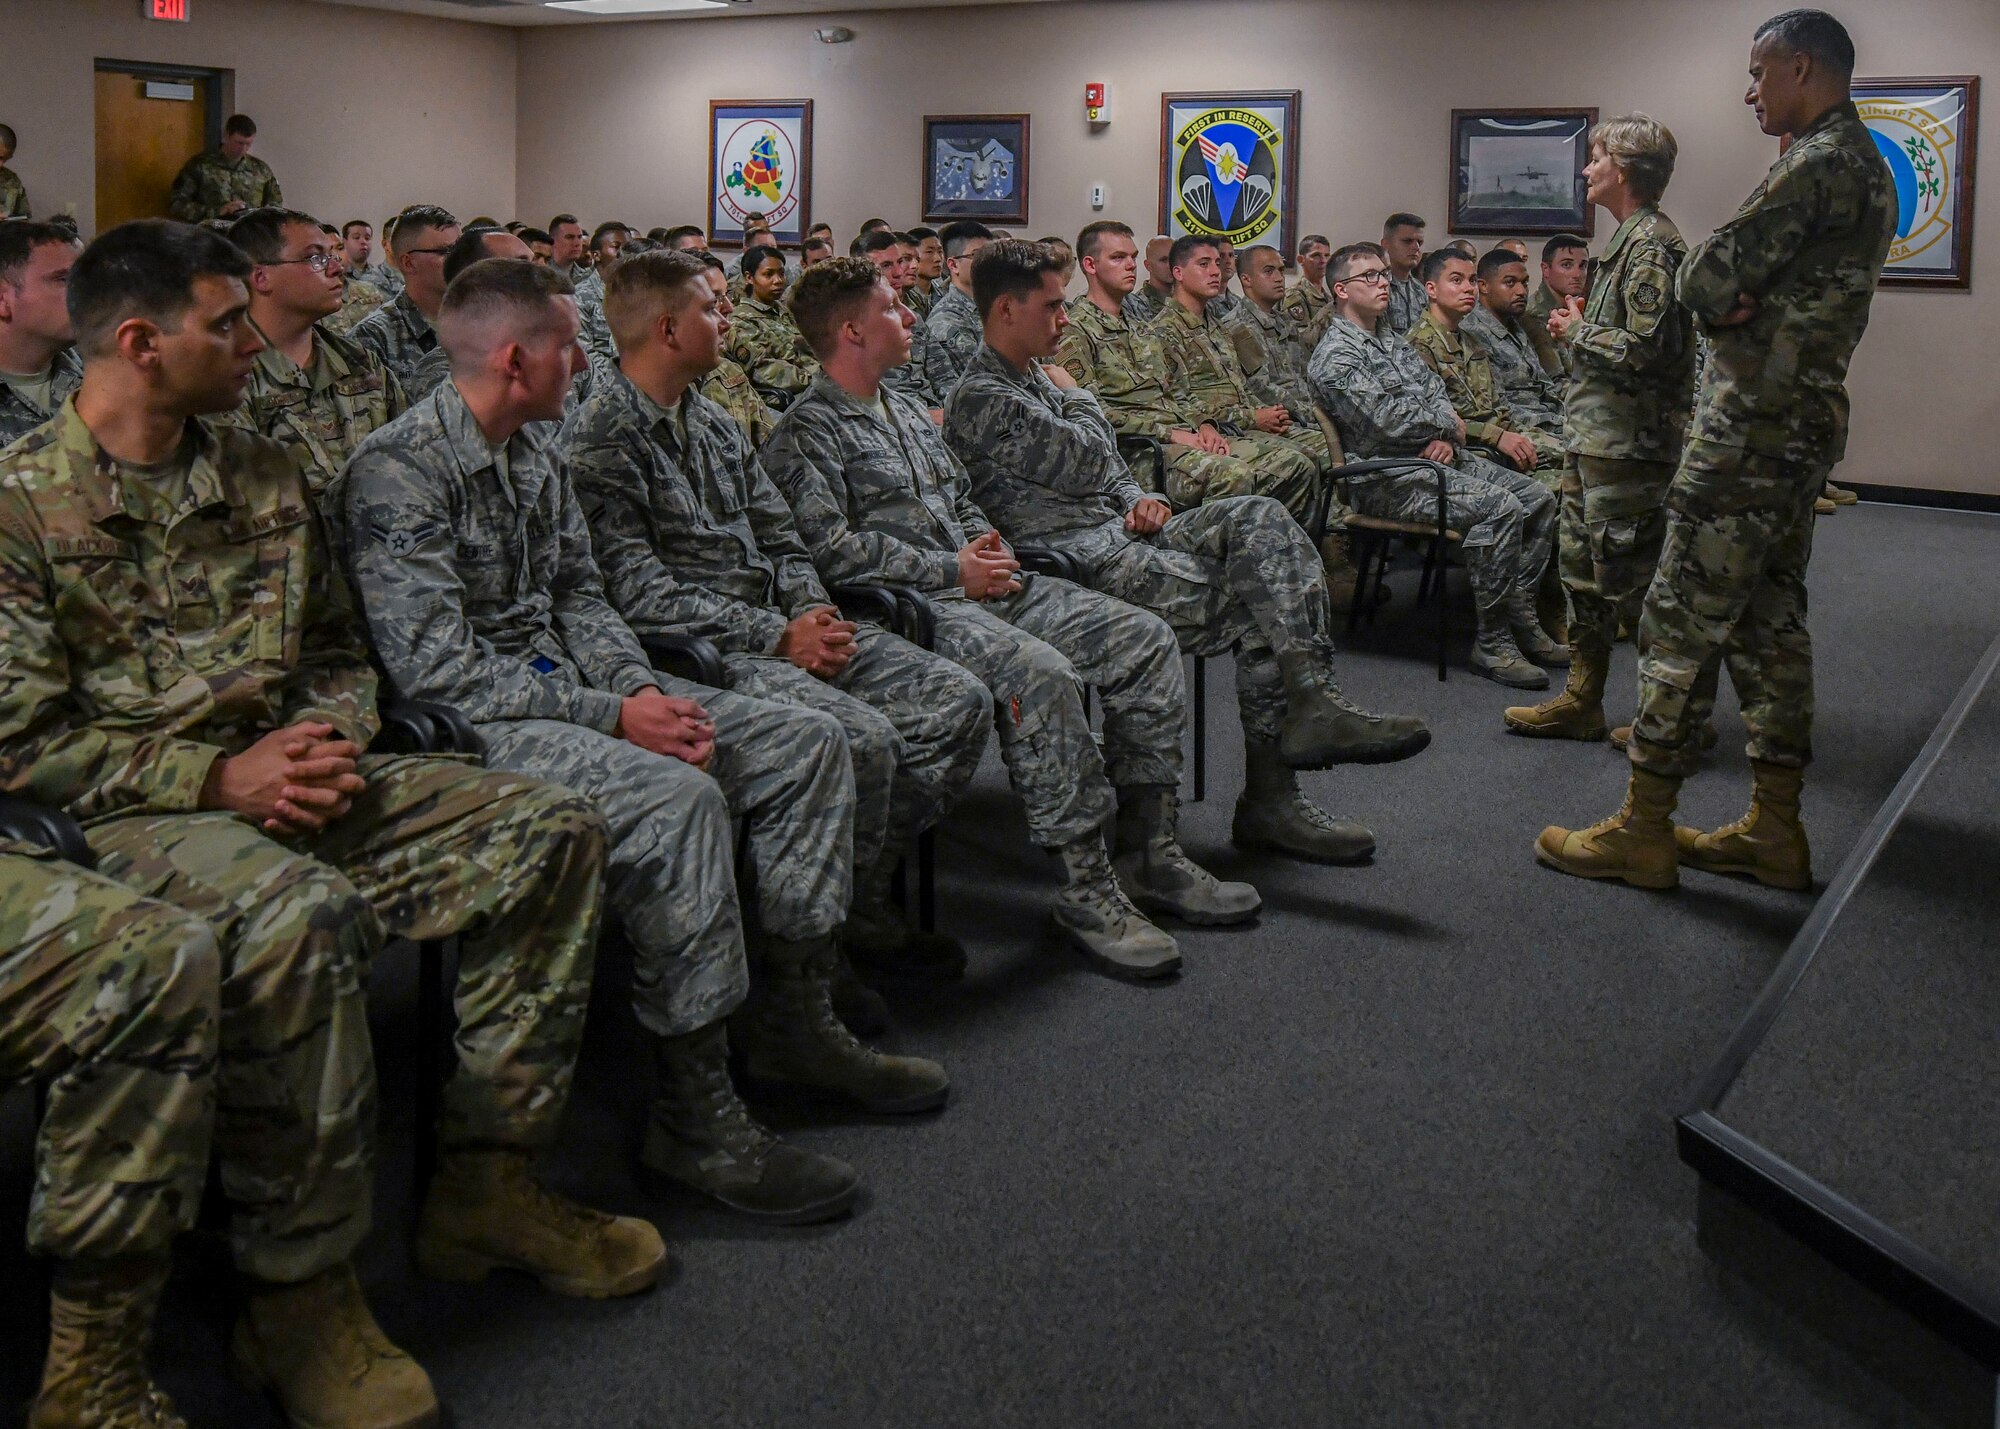 Gen. Maryanne Miller, commander of Air Mobility Command, and Chief Master Sgt. Terrence Greene, AMC command chief master sergeant, speak to junior enlisted members of the 437th Maintenance Group during a visit to Joint Base Charleston, South Carolina, July 31, 2019. Miller and Greene visited JB Charleston July 29 to August 1 to get a first-hand look at mission capabilities, new innovative programs and how JB Charleston is taking care of its service members to build a stronger mobility force.  New innovative programs being implemented on base include a summer intern program, a centralized fitness improvement program and a Child Development Center program to expand infant care options, as well as other programs to help improve quality of life and retain service members.